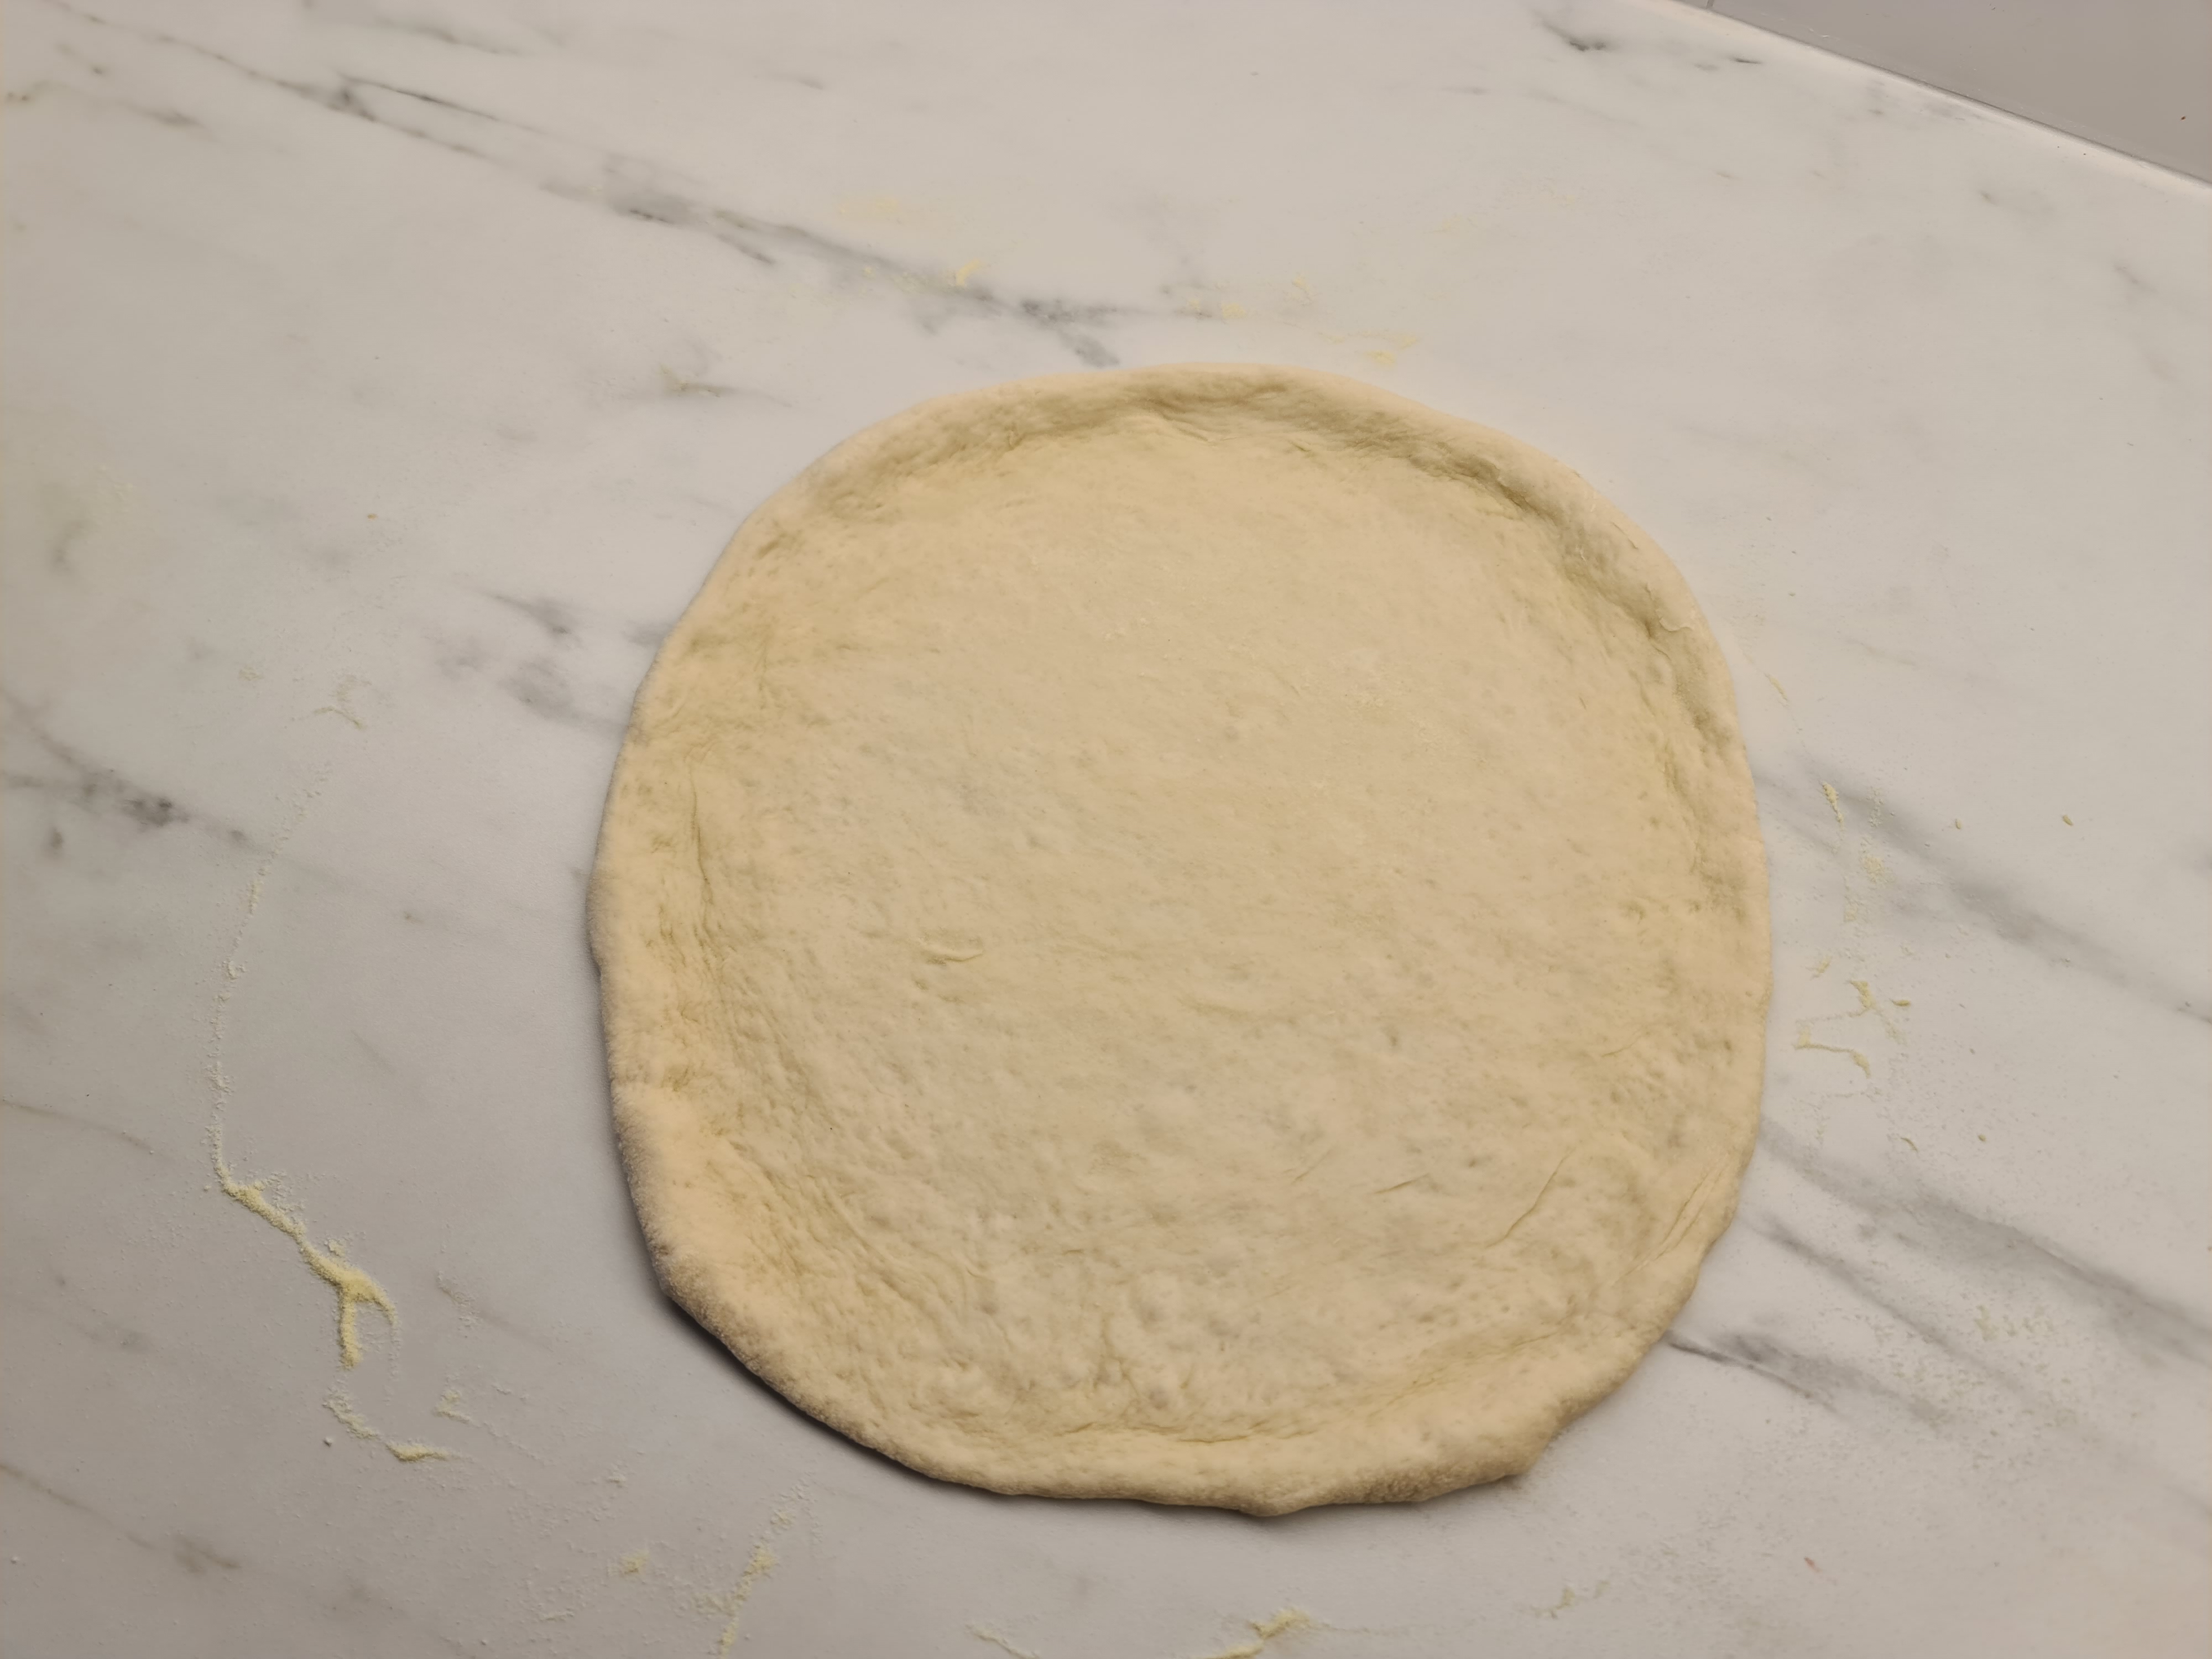 Fully stretched out pizza dough